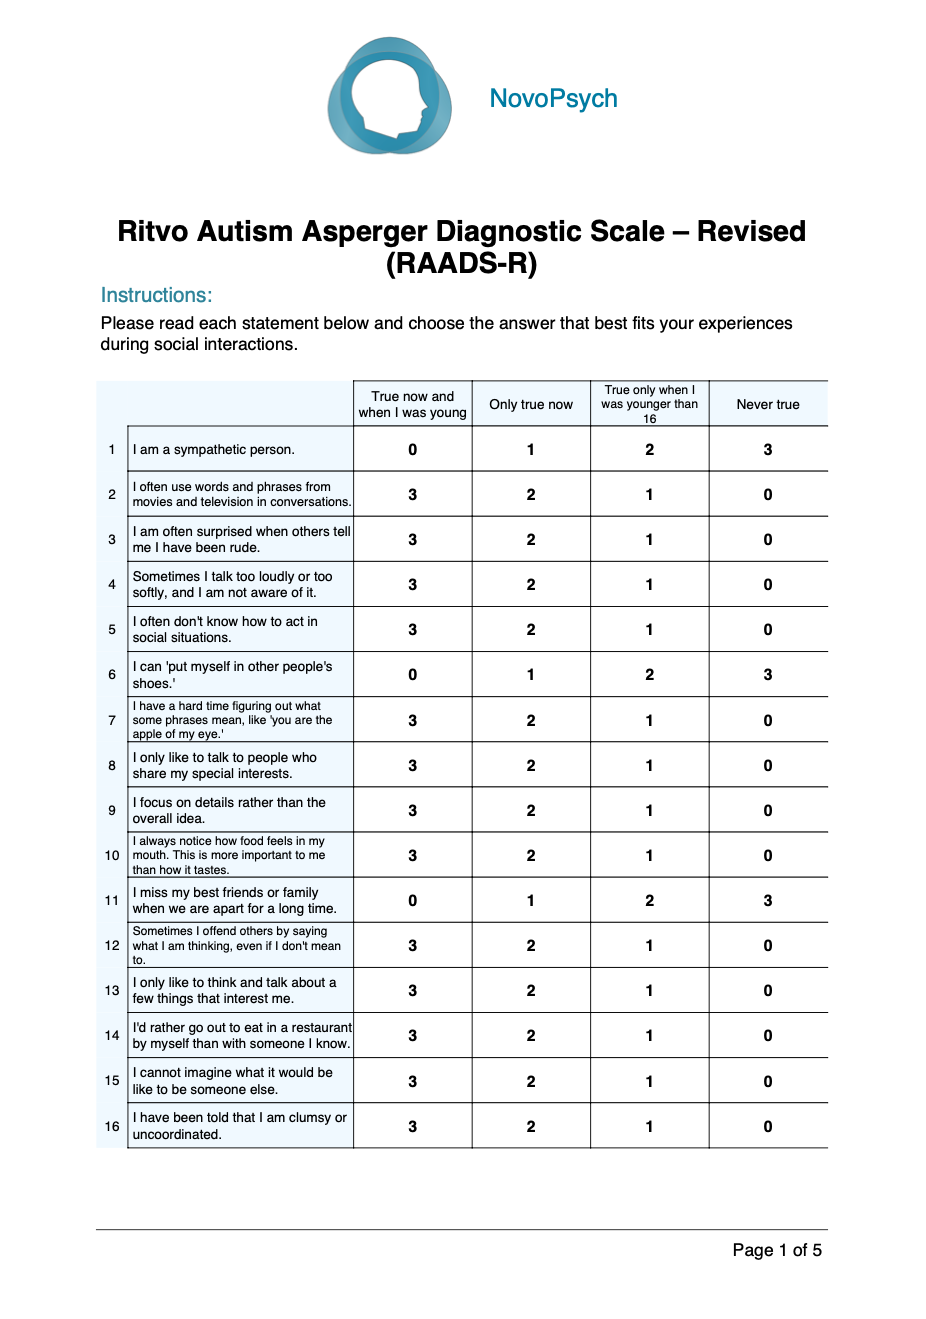 ritvo-autism-asperger-diagnostic-scale-revised-raads-r-novopsych